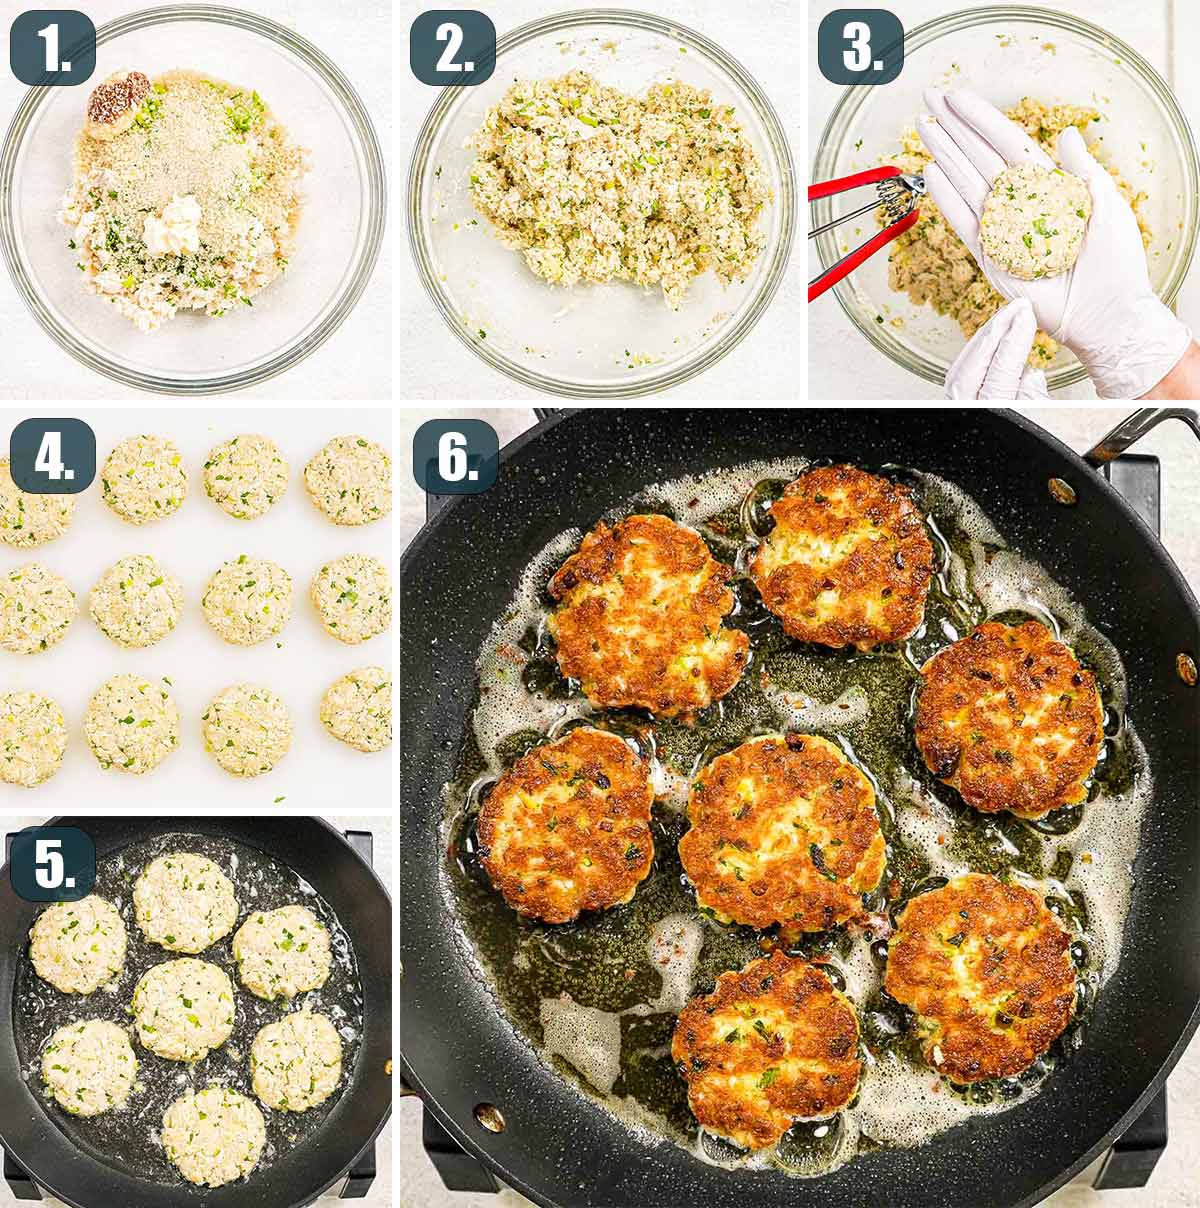 detailed process shots showing how to make crab cakes.